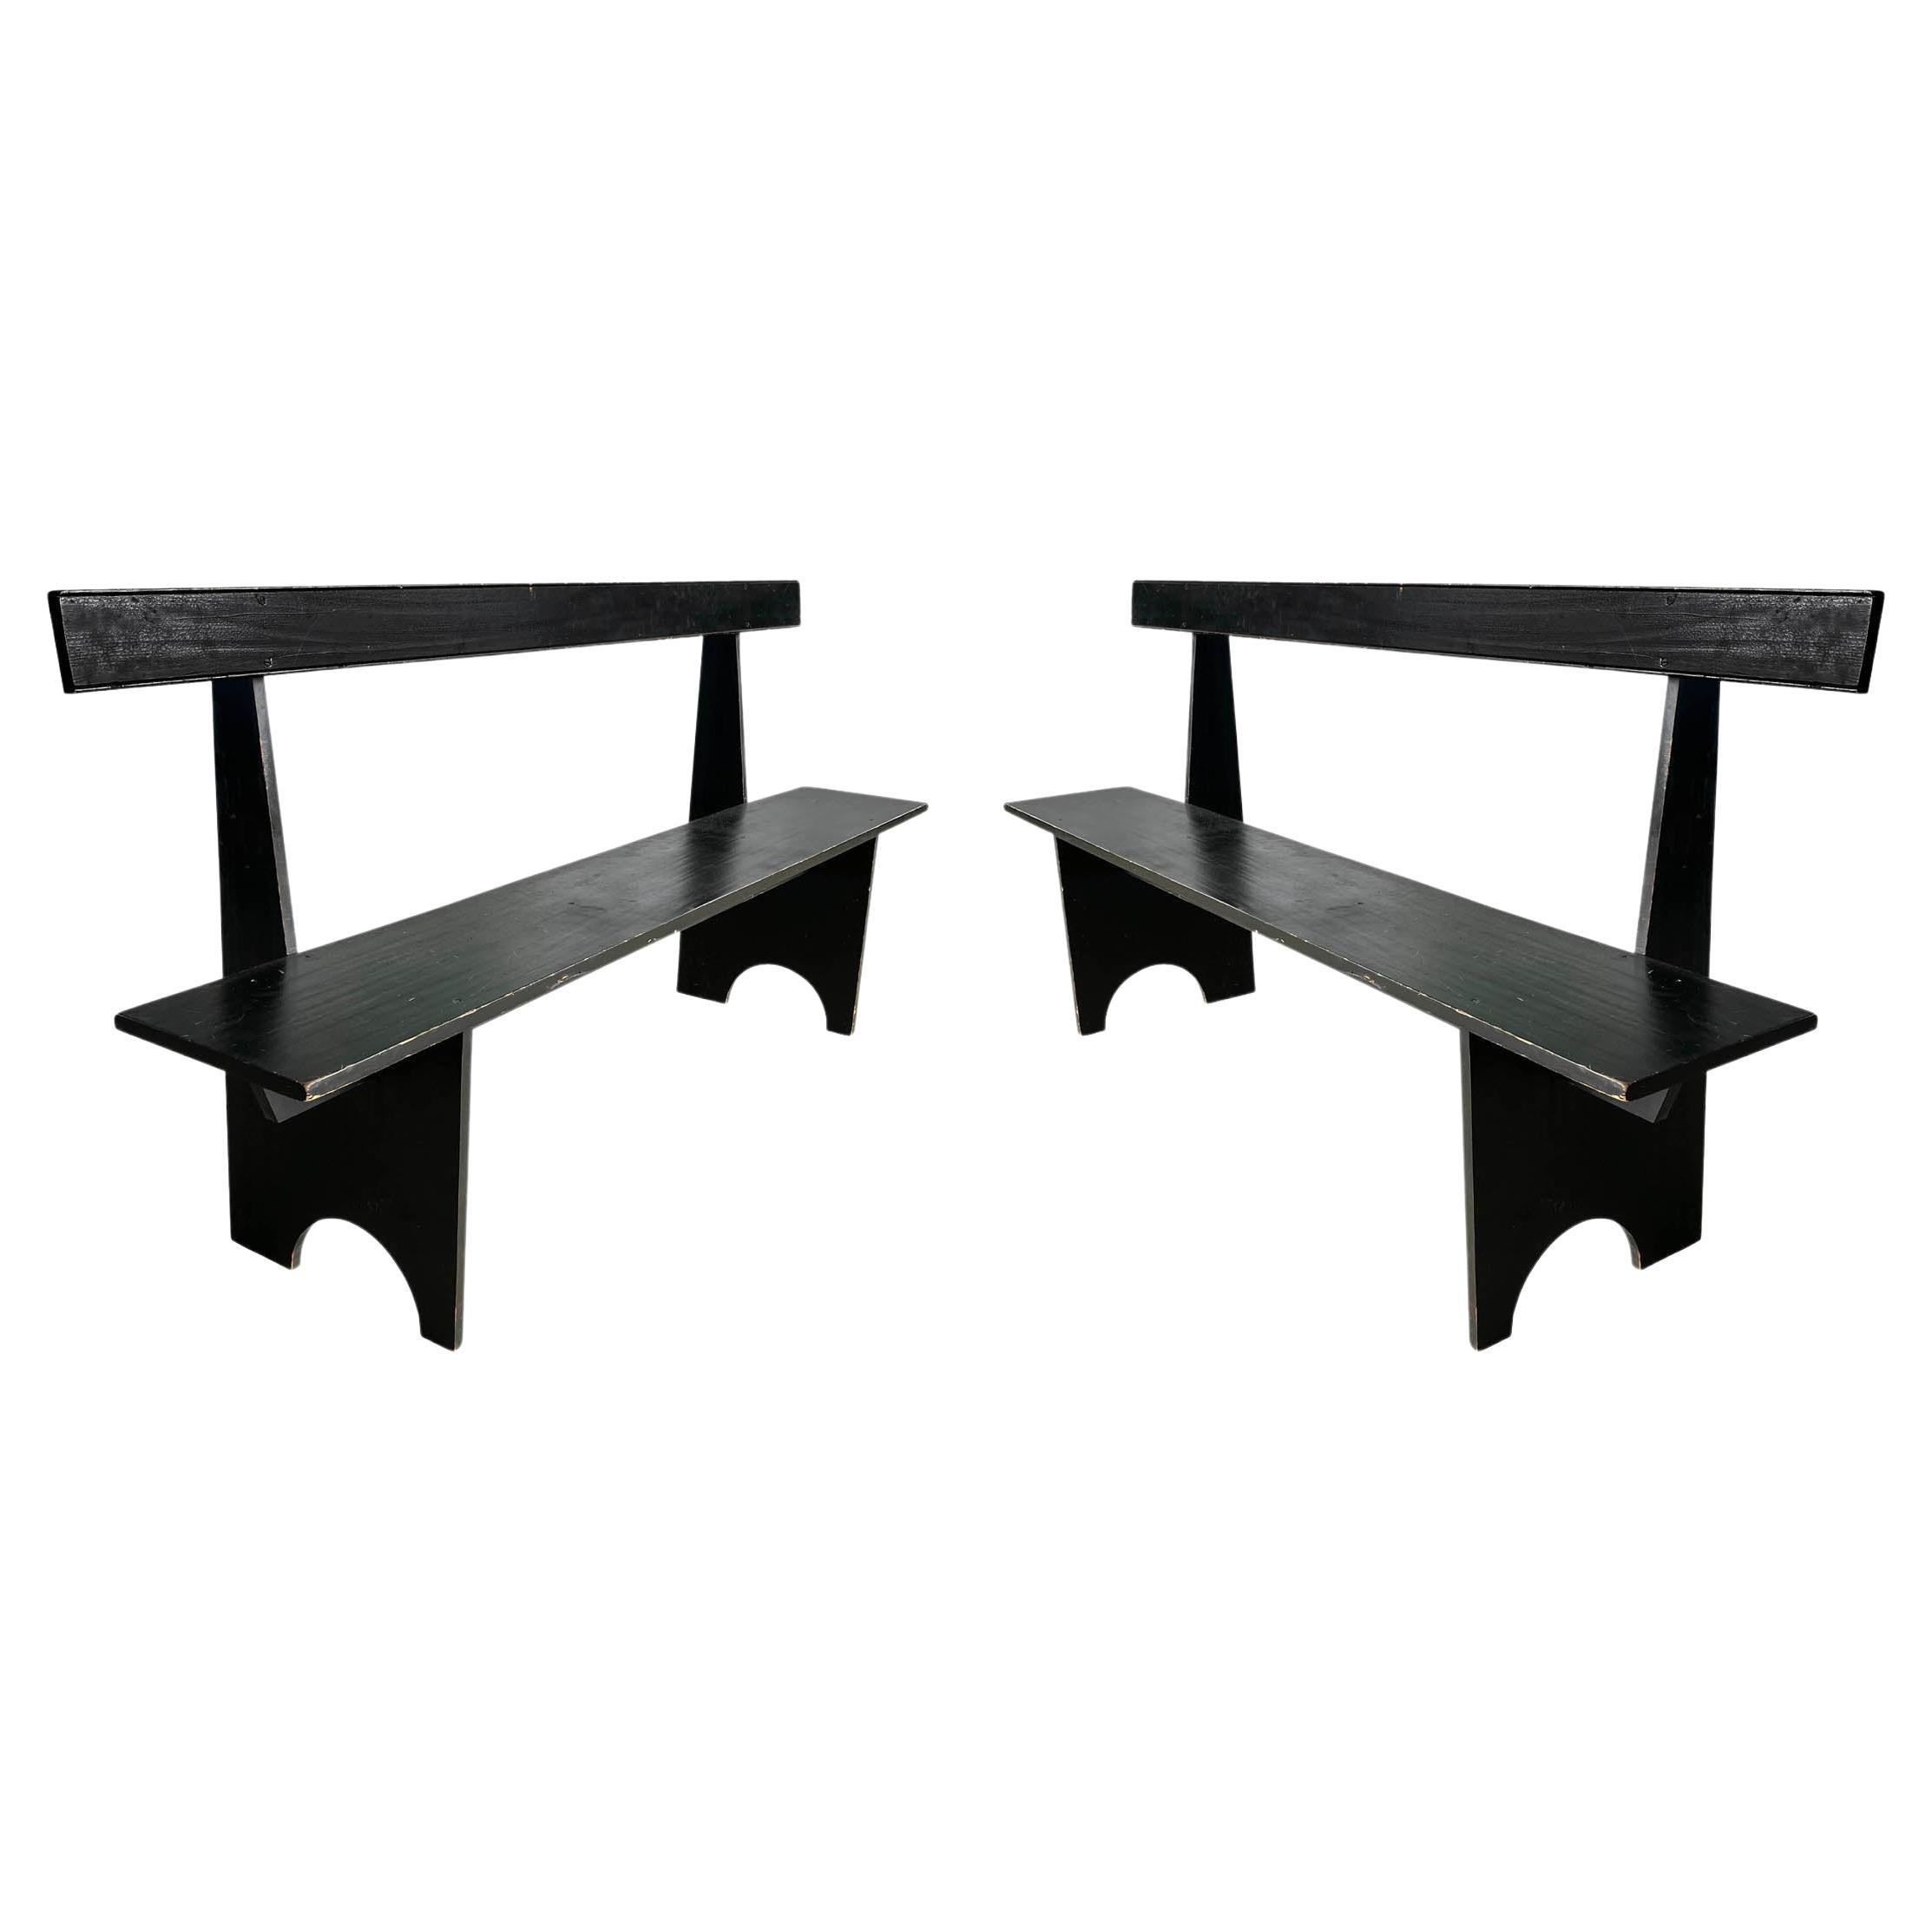 Pair of American Modernist Shaker-Inspired Benches